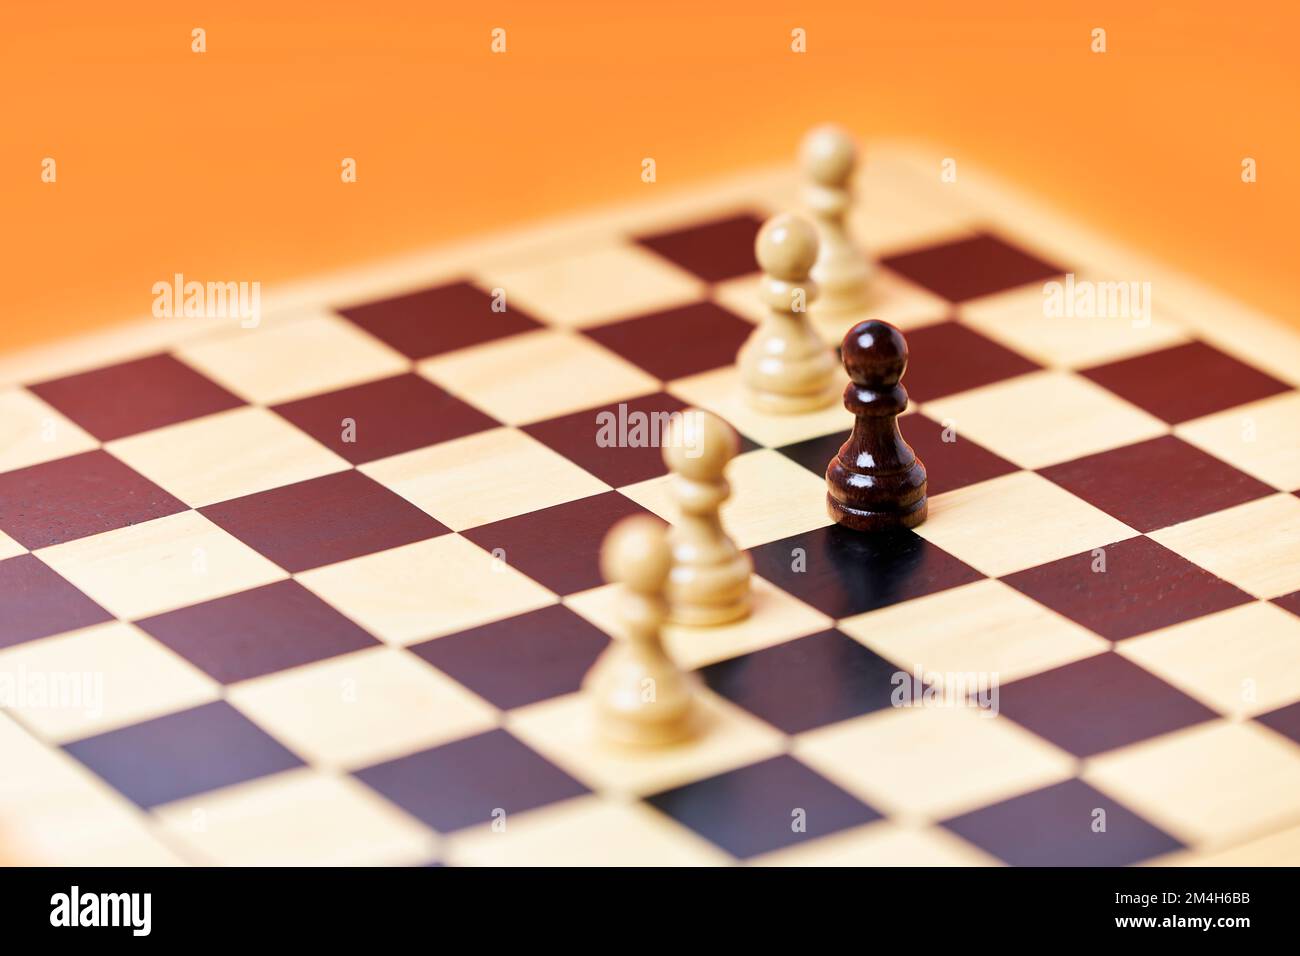 Chess row of white pawns with black pawn challenge center. Chess game strategy Stock Photo